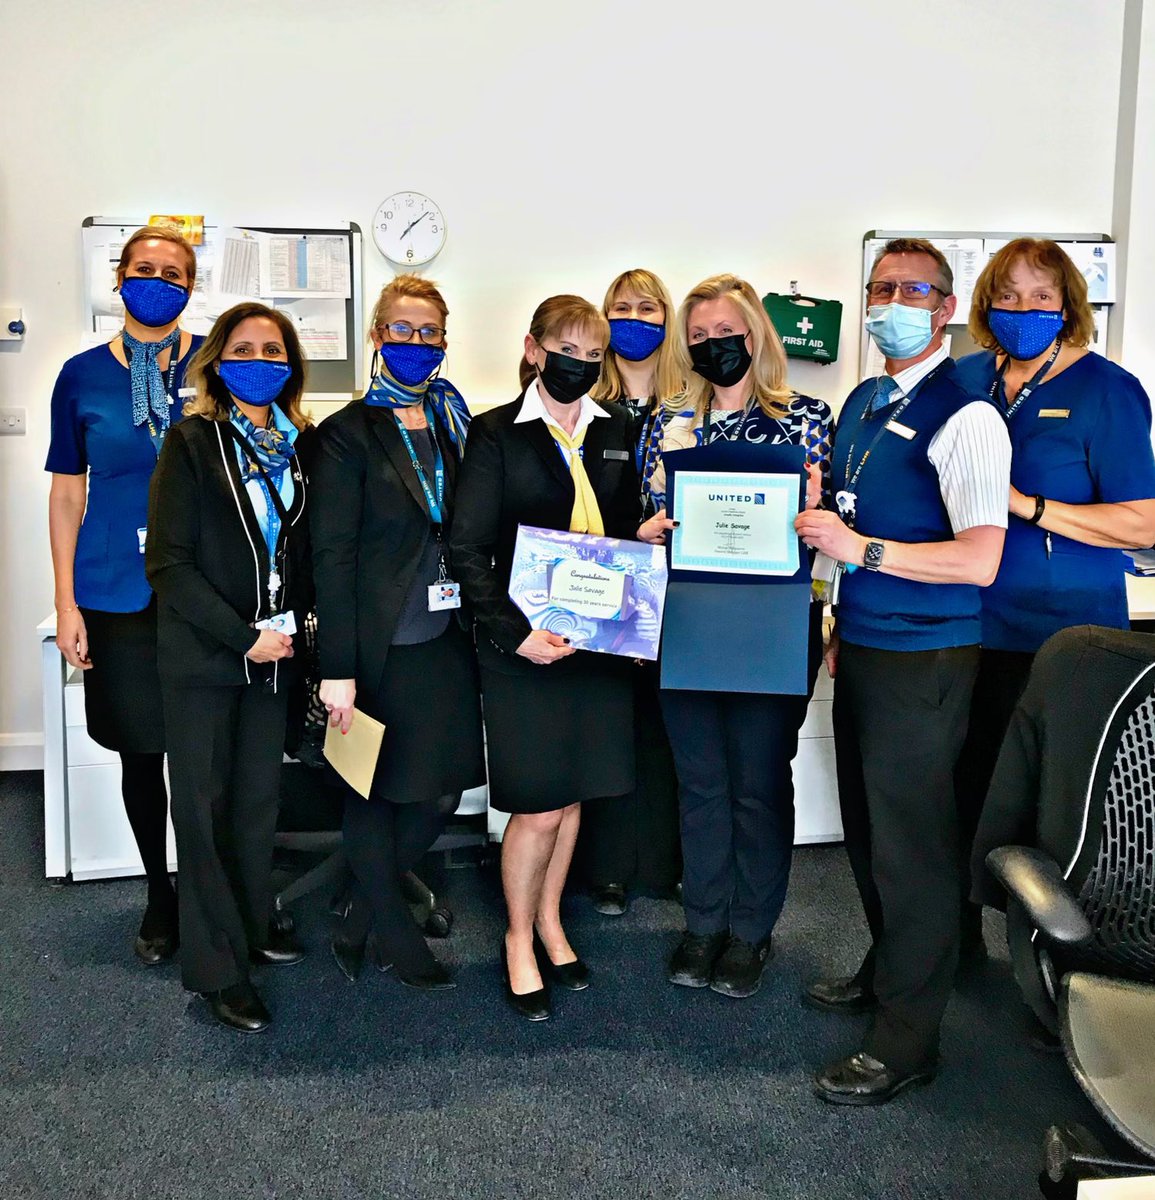 LHR CS like nothing better than a ‘get together’ especially when it involves a team member’s celebration of a marvellous 30 yr milestone. Congratulations Julie from us all at LHR. @aaronsmythe @marisaatunited @WeAreUnited #BeingUnited